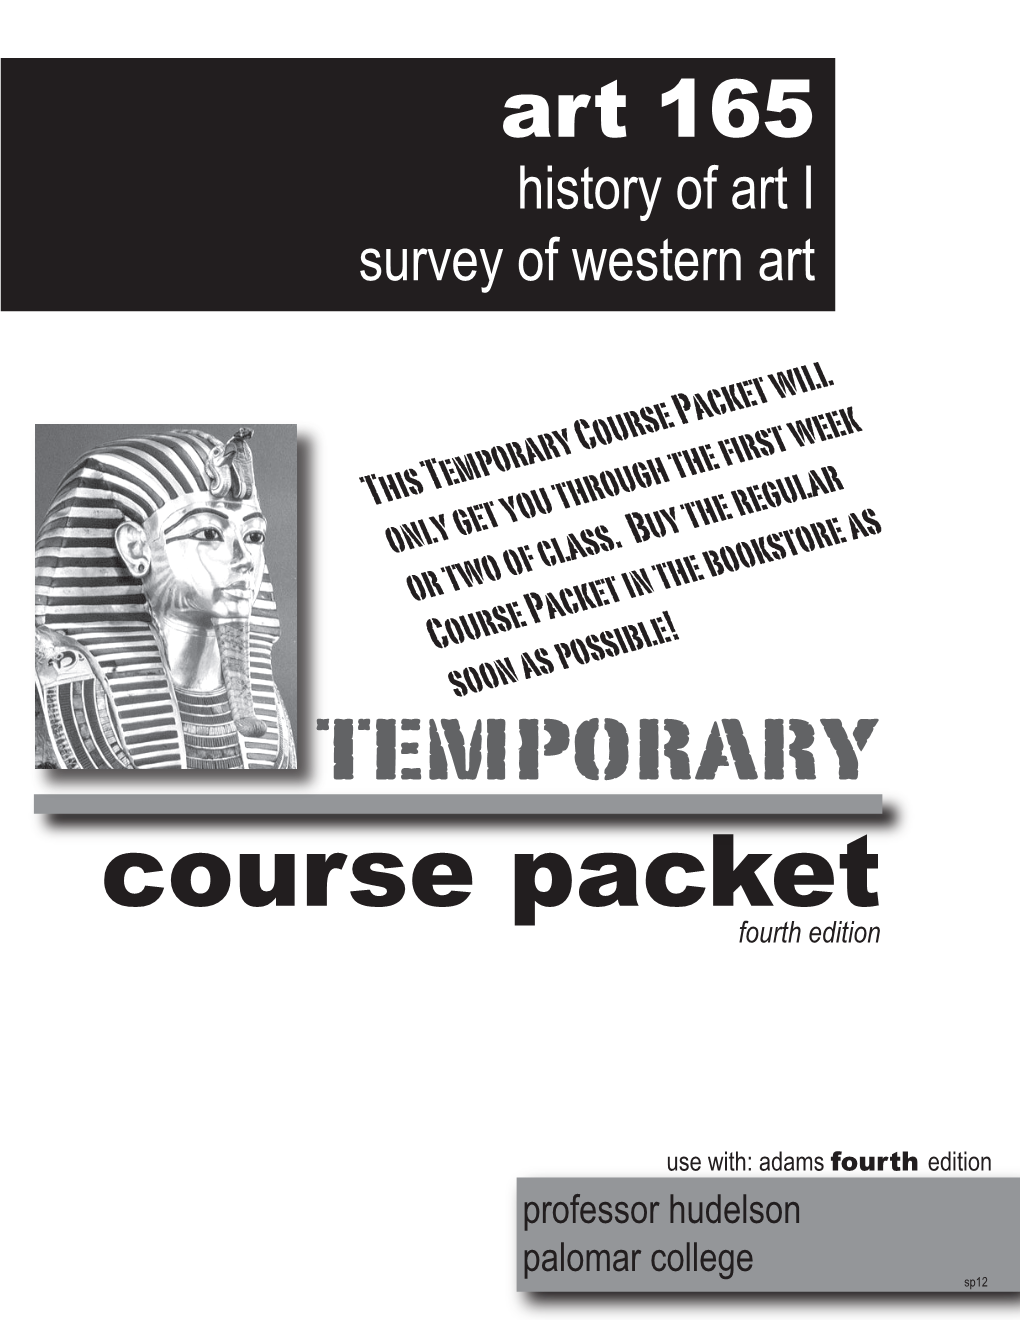 Course Packet Temporary